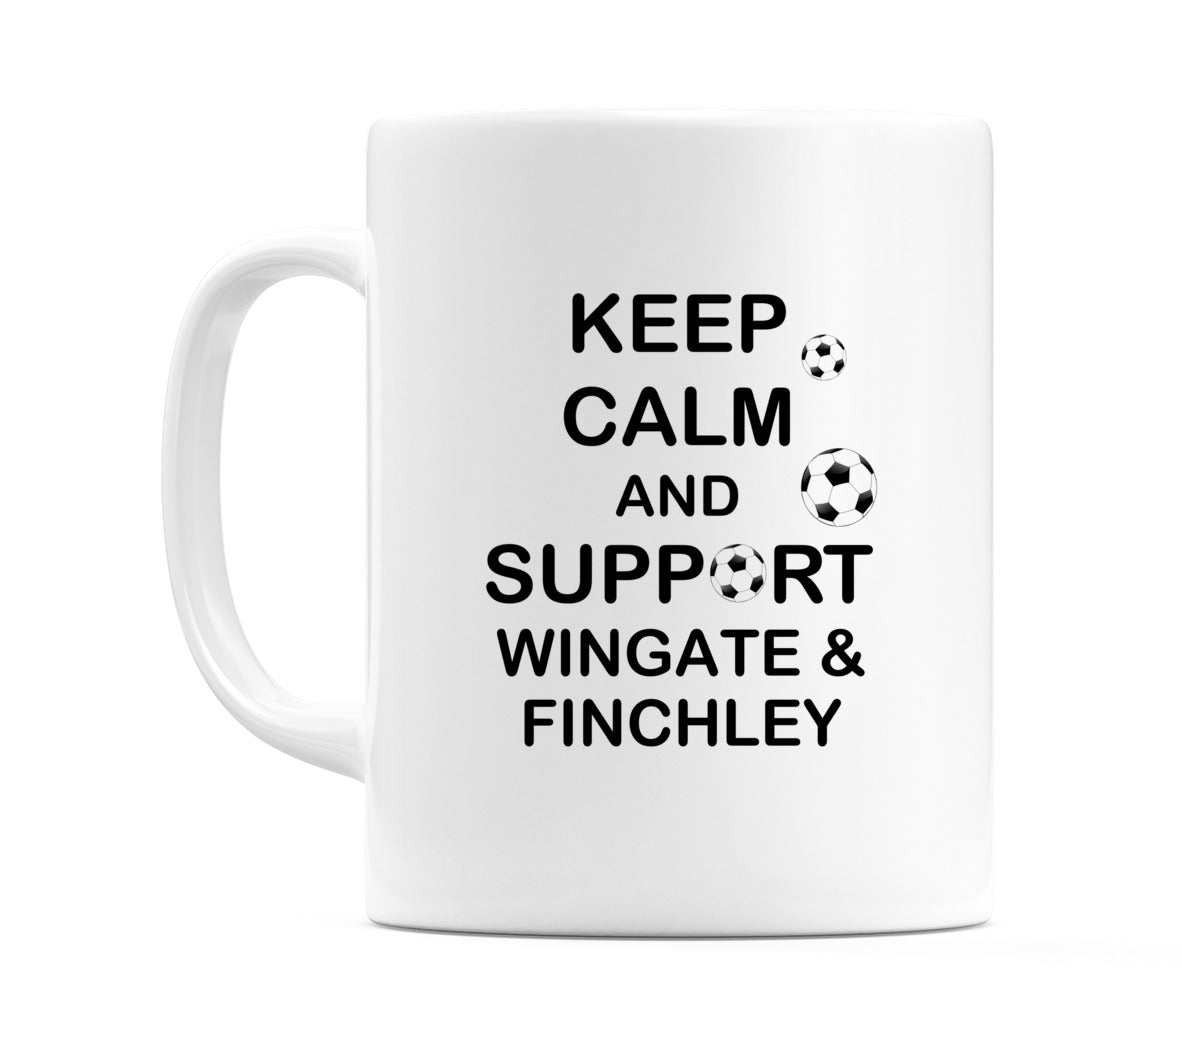 Keep Calm And Support Wingate & Finchley Mug